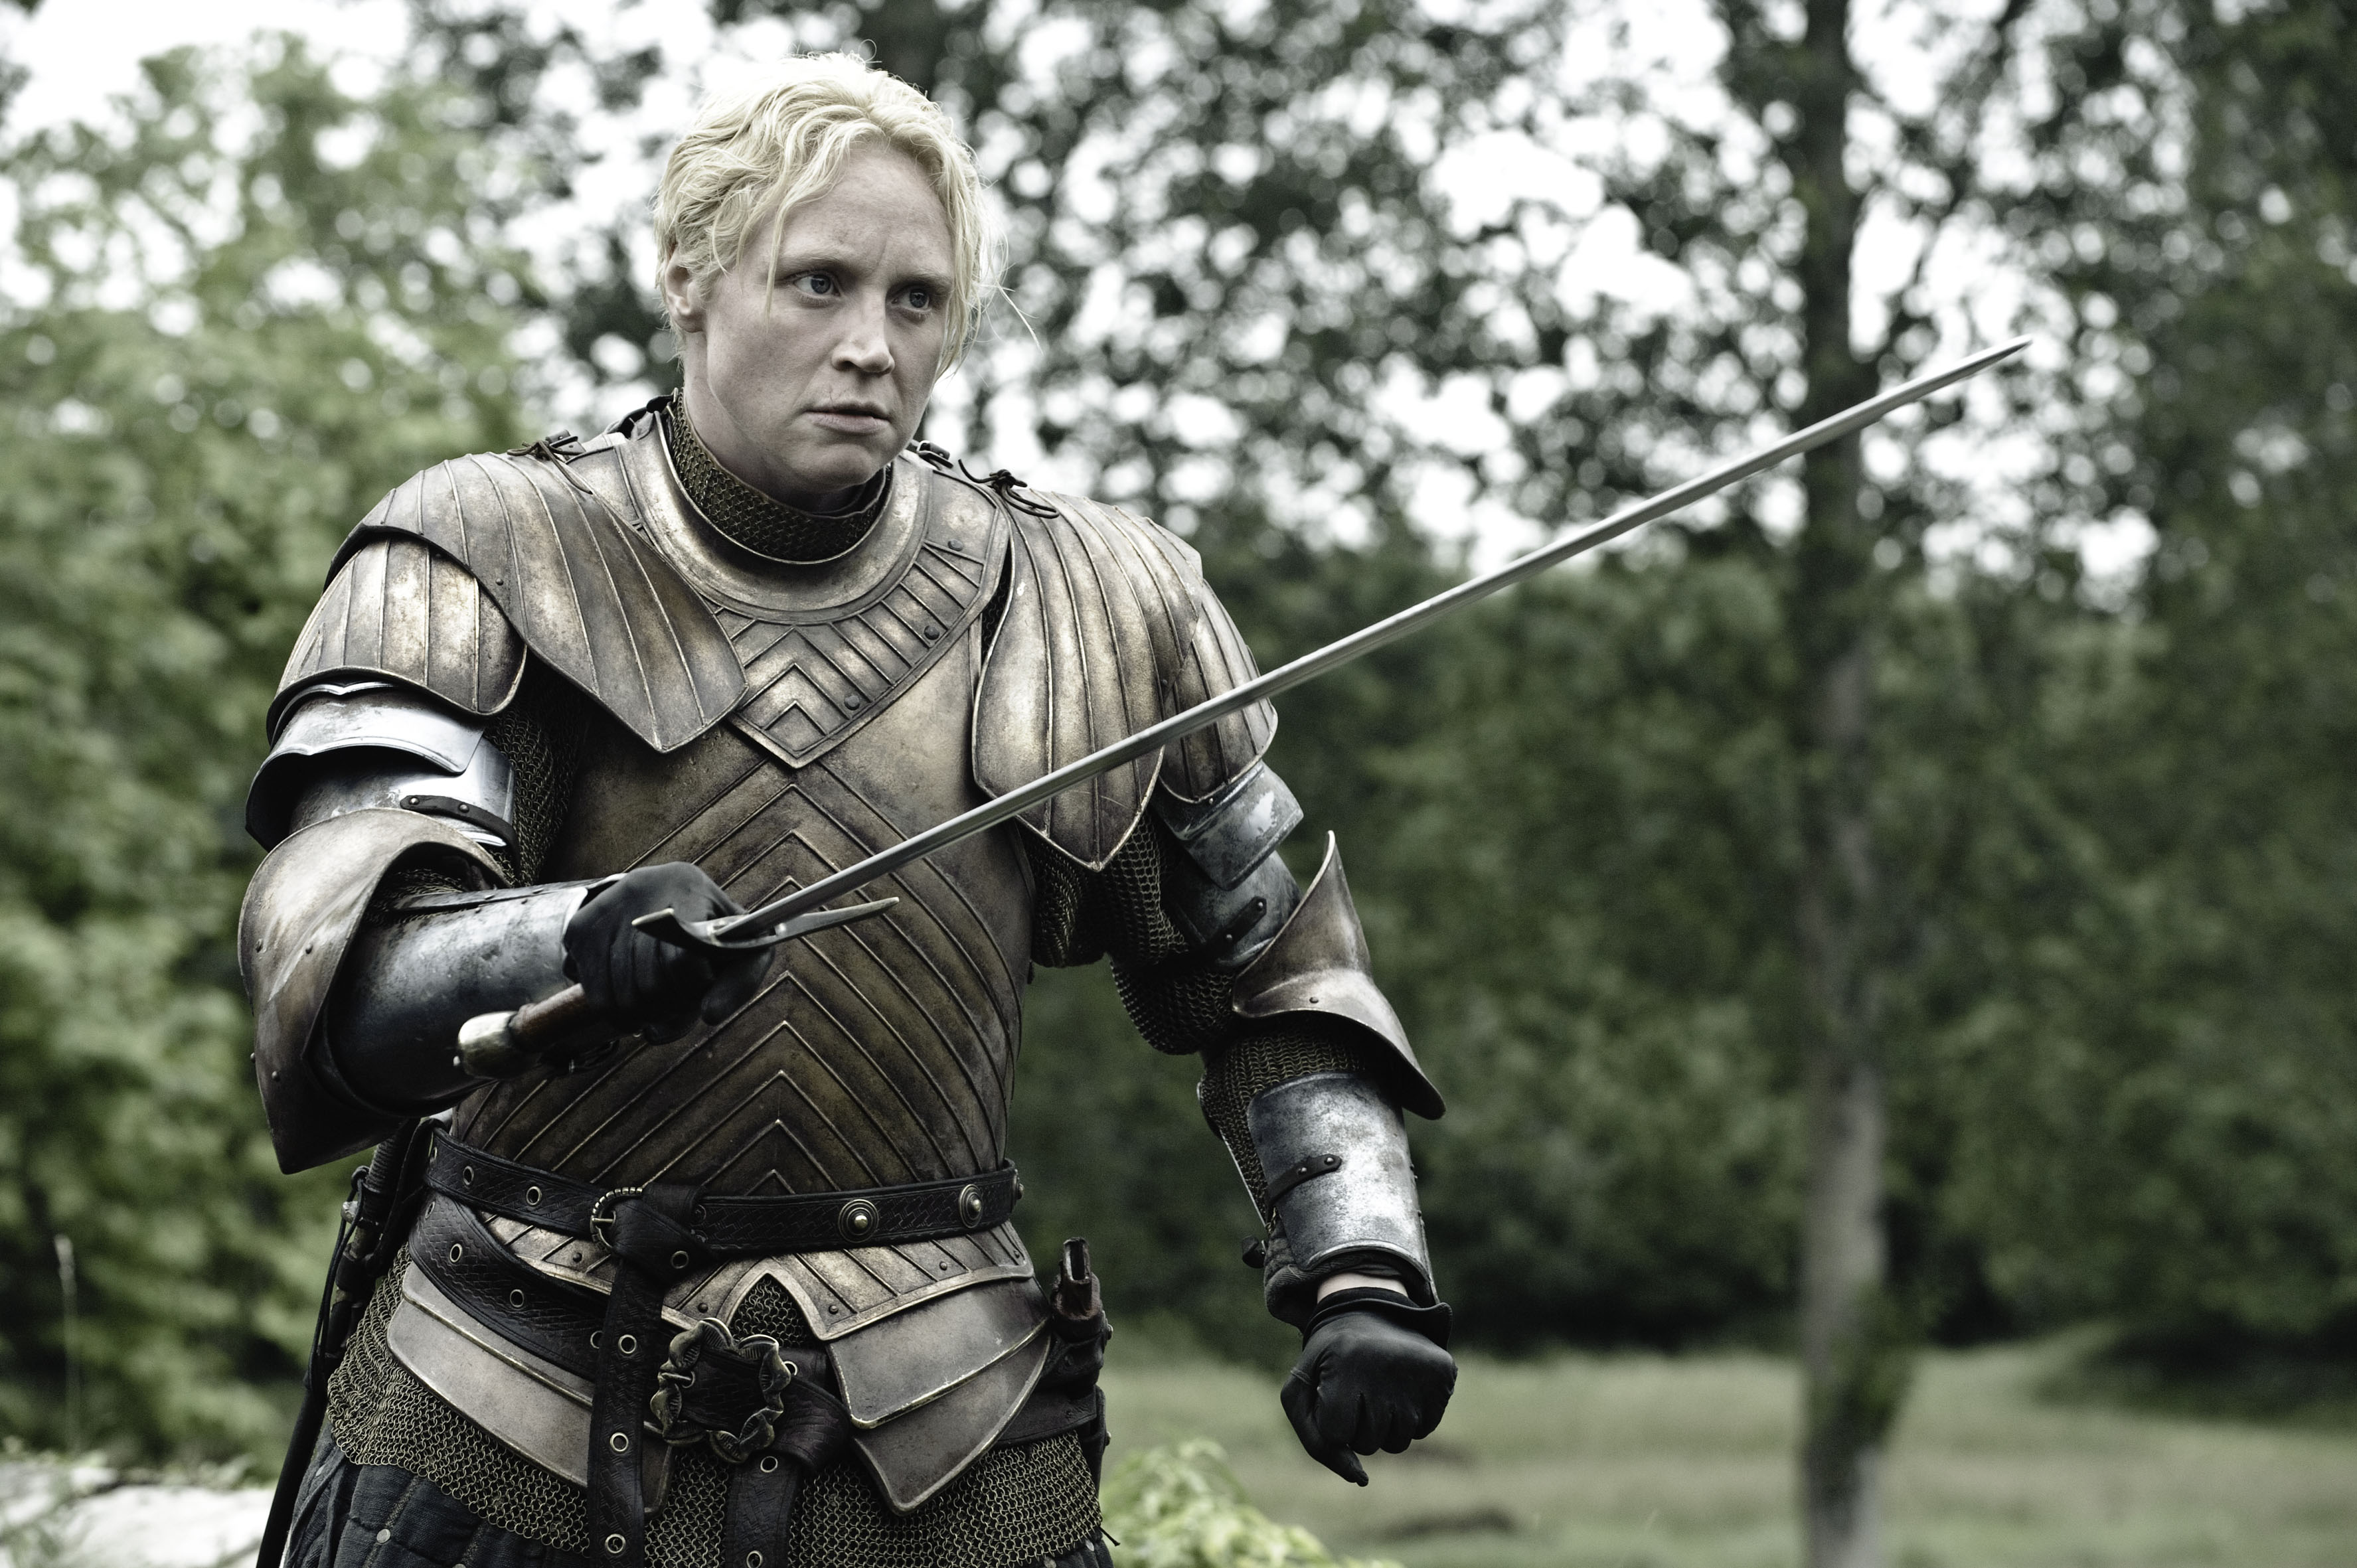 Game Of Thrones, Series 3 EP302 Featuring Gwendoline Christie as Brienne of Tarth © HBO Enterprises